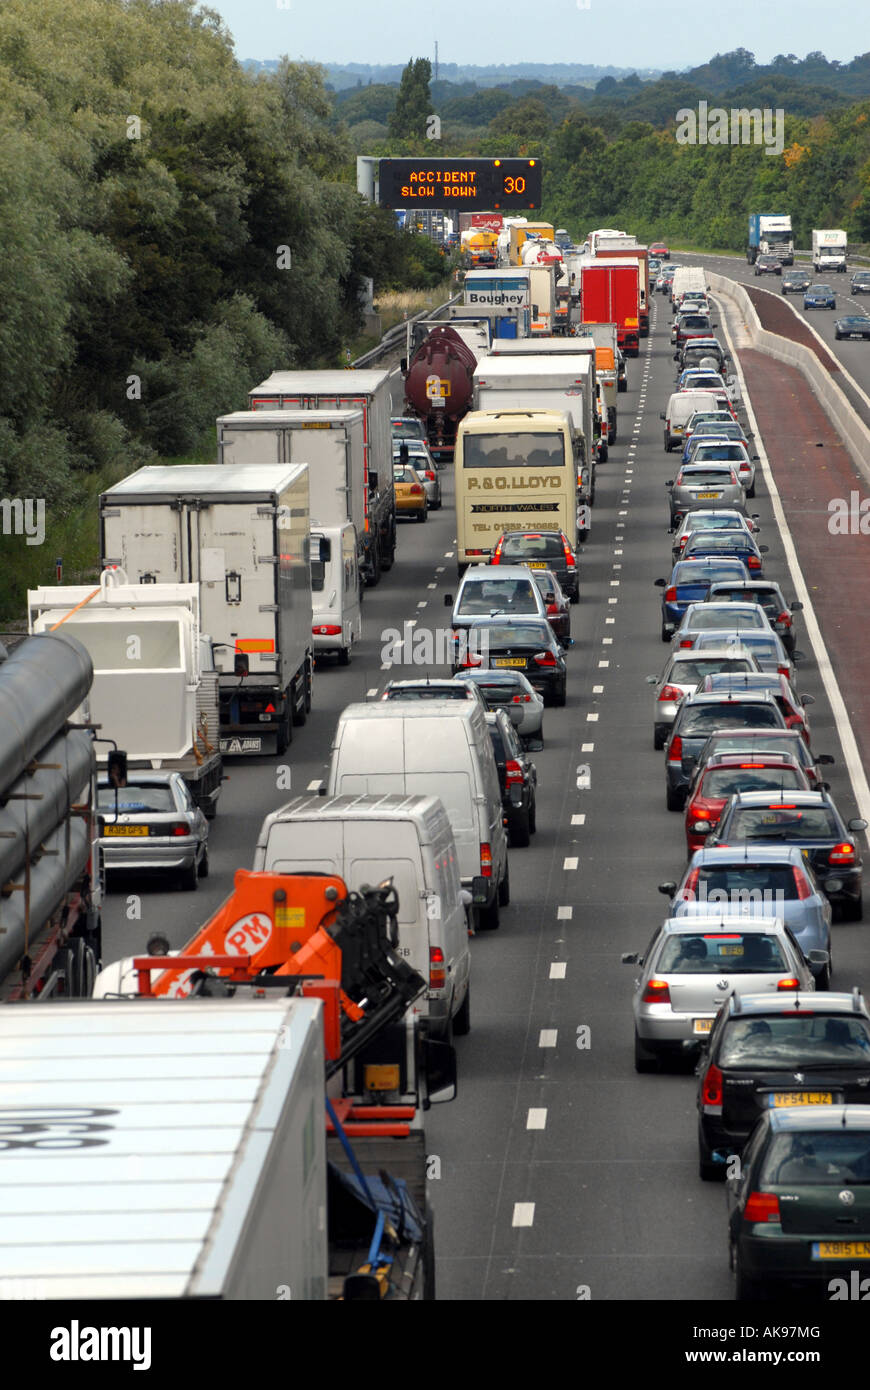 TRAFFIC JAMS ON THE M6 MOTORWAY NORTHBOUND BETWEEN JUNCTION 12 AND 13 IN STAFFORDSHIRE,ENGLAND,UK. Stock Photo